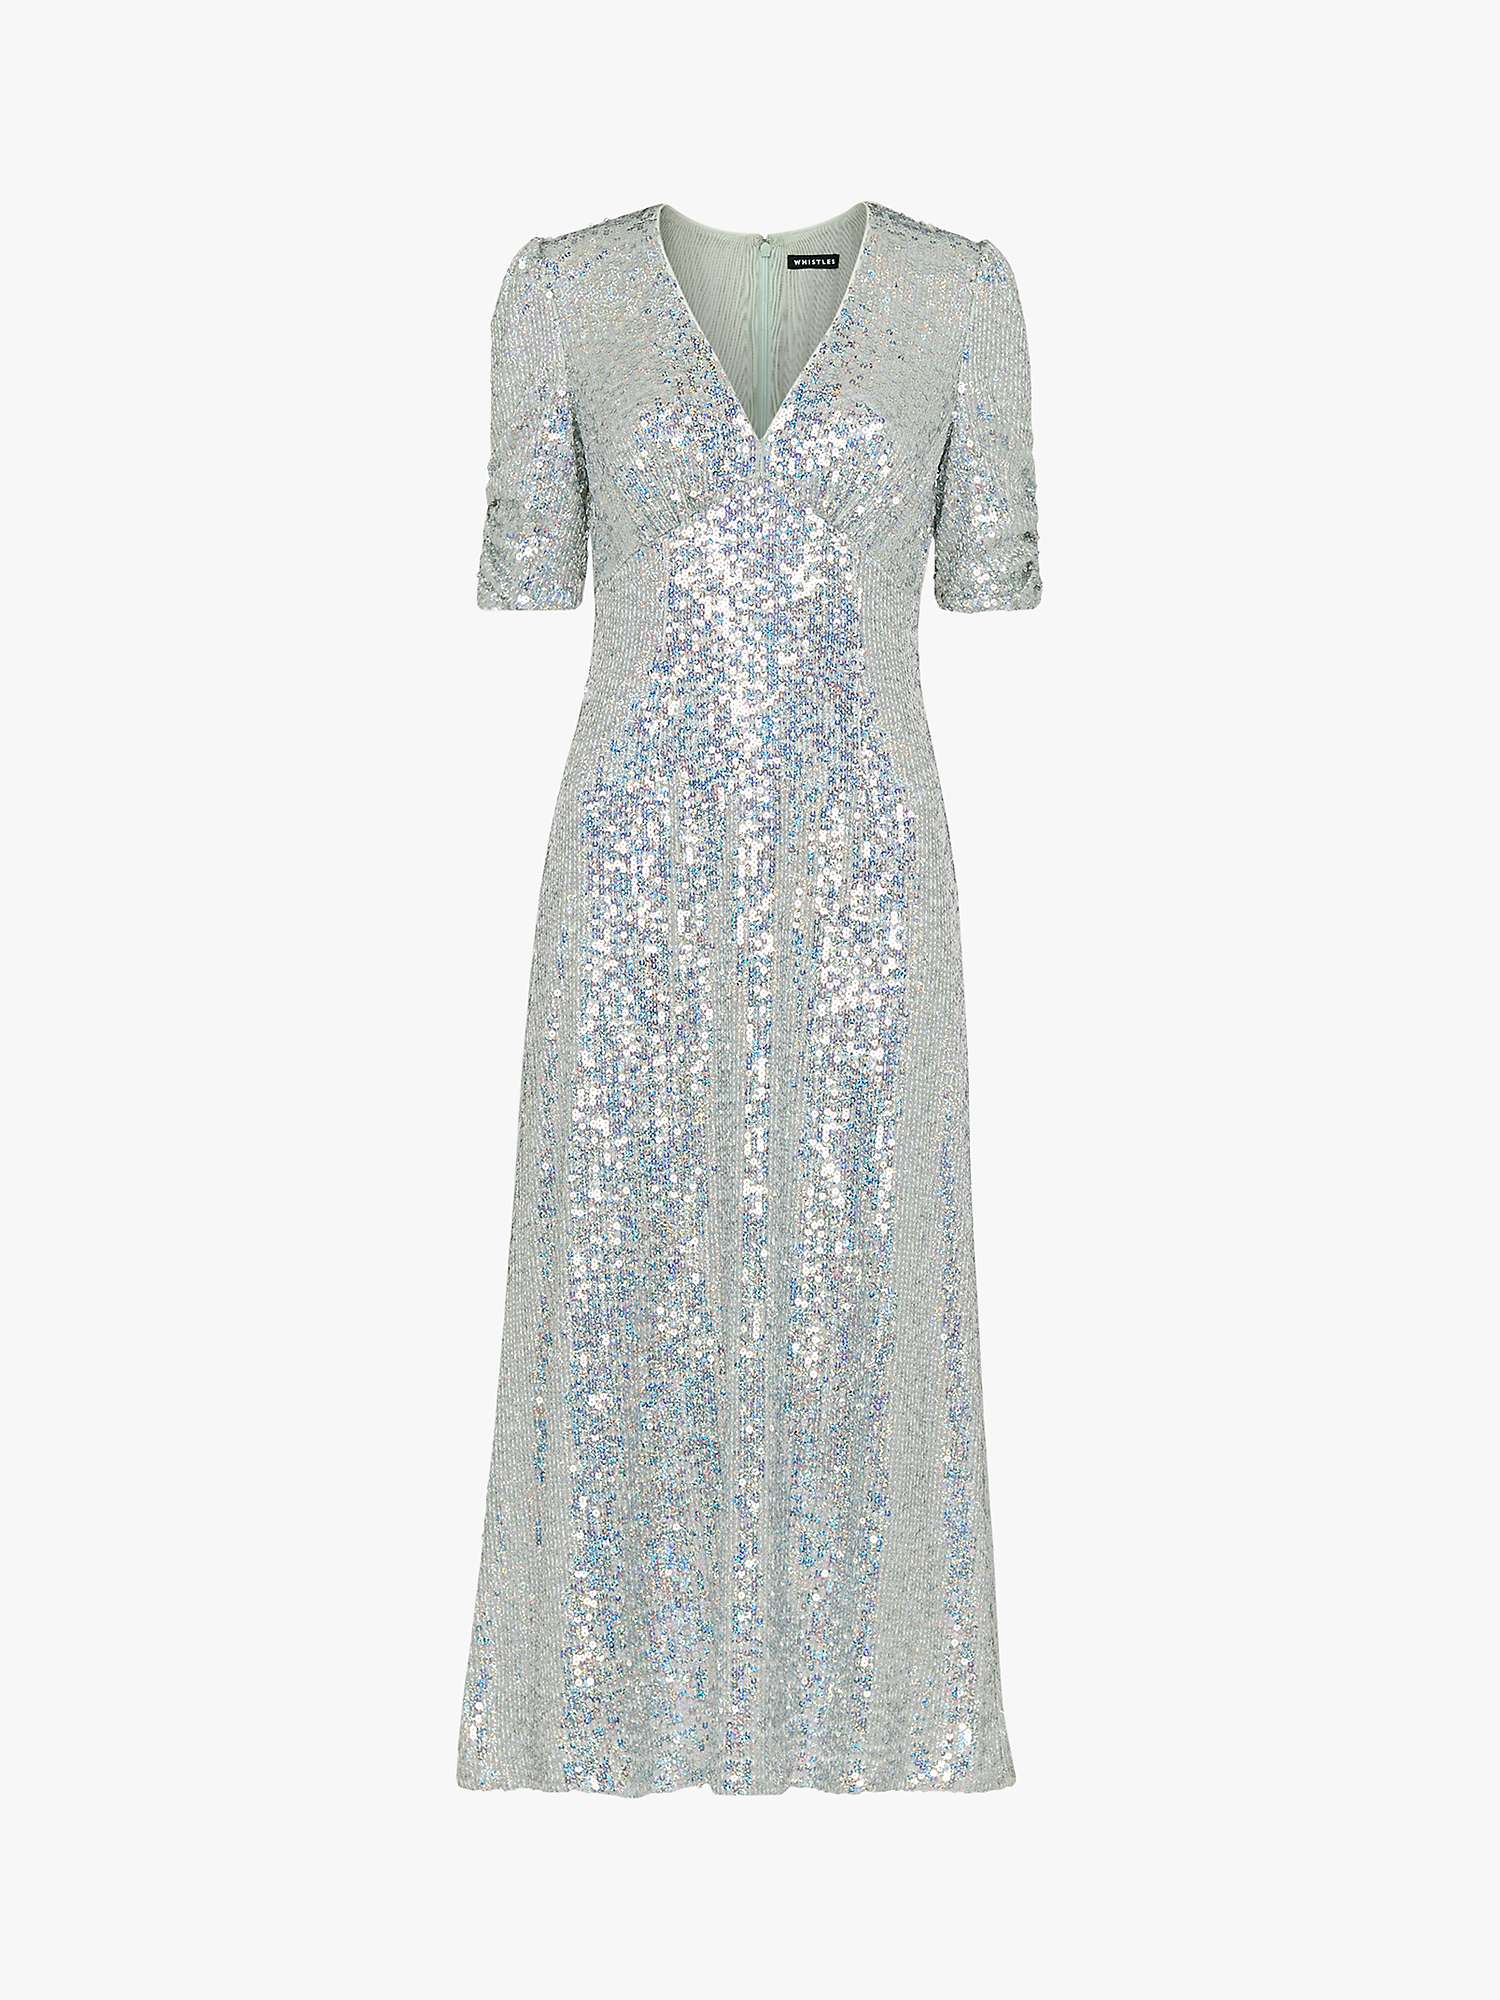 Buy Whistles Sequin Midi Dress, Silver Online at johnlewis.com